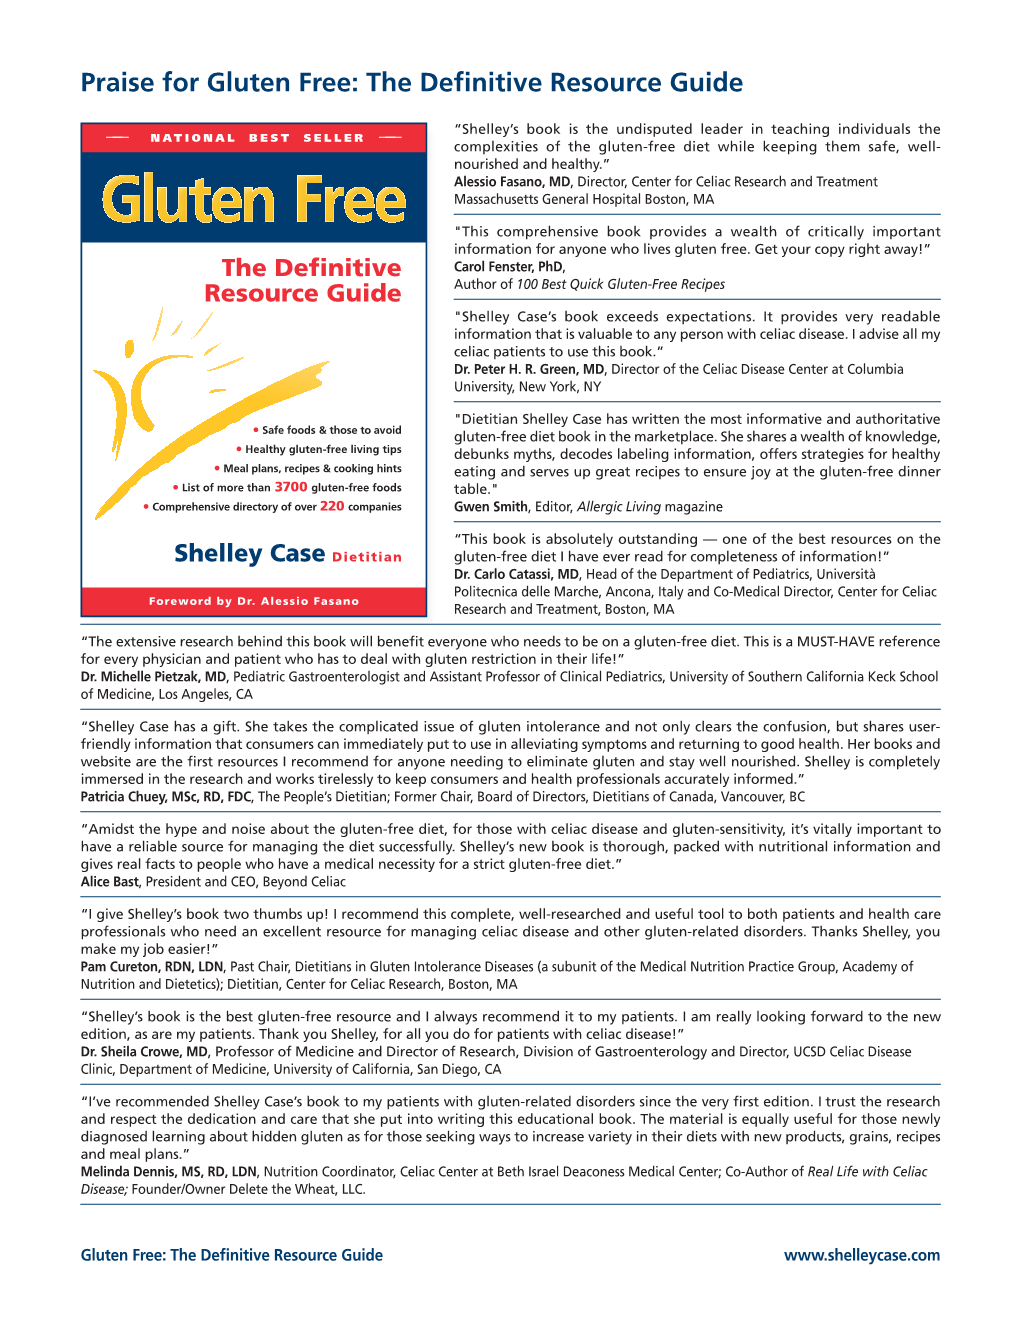 Gluten Free: the Definitive Resource Guide